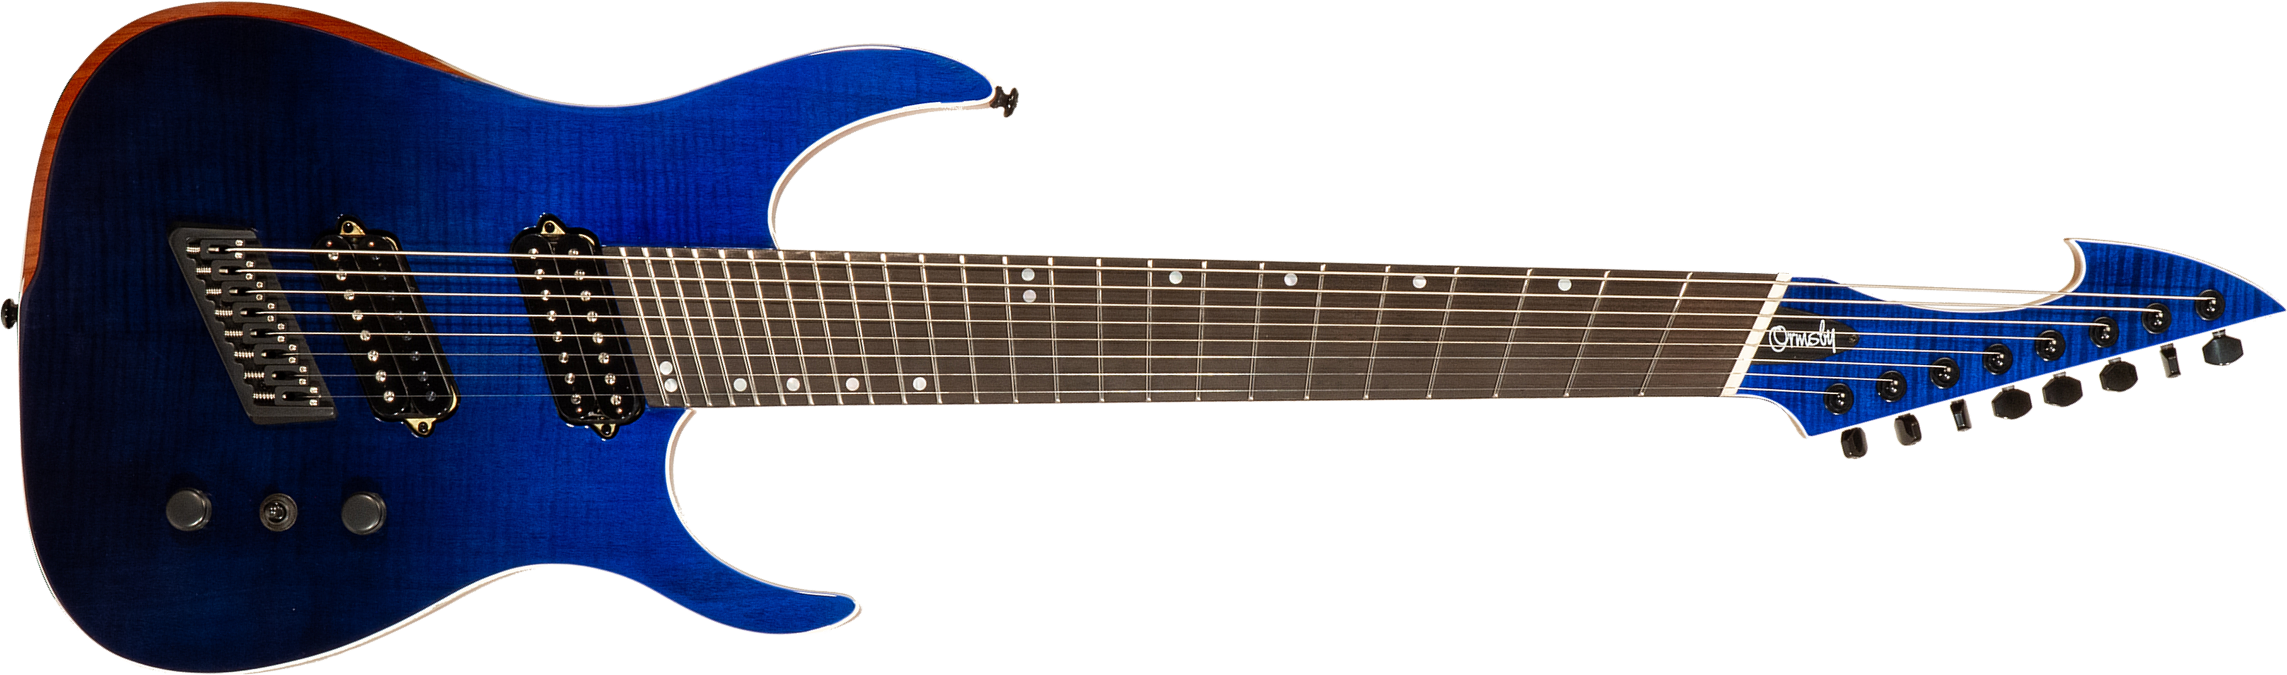 Ormsby Hype Gtr 8 Ltd Run 16 8c Multiscale 2h Ht Eb #gtr07665 - Sky Fall - 8 and 9 string electric guitar - Main picture